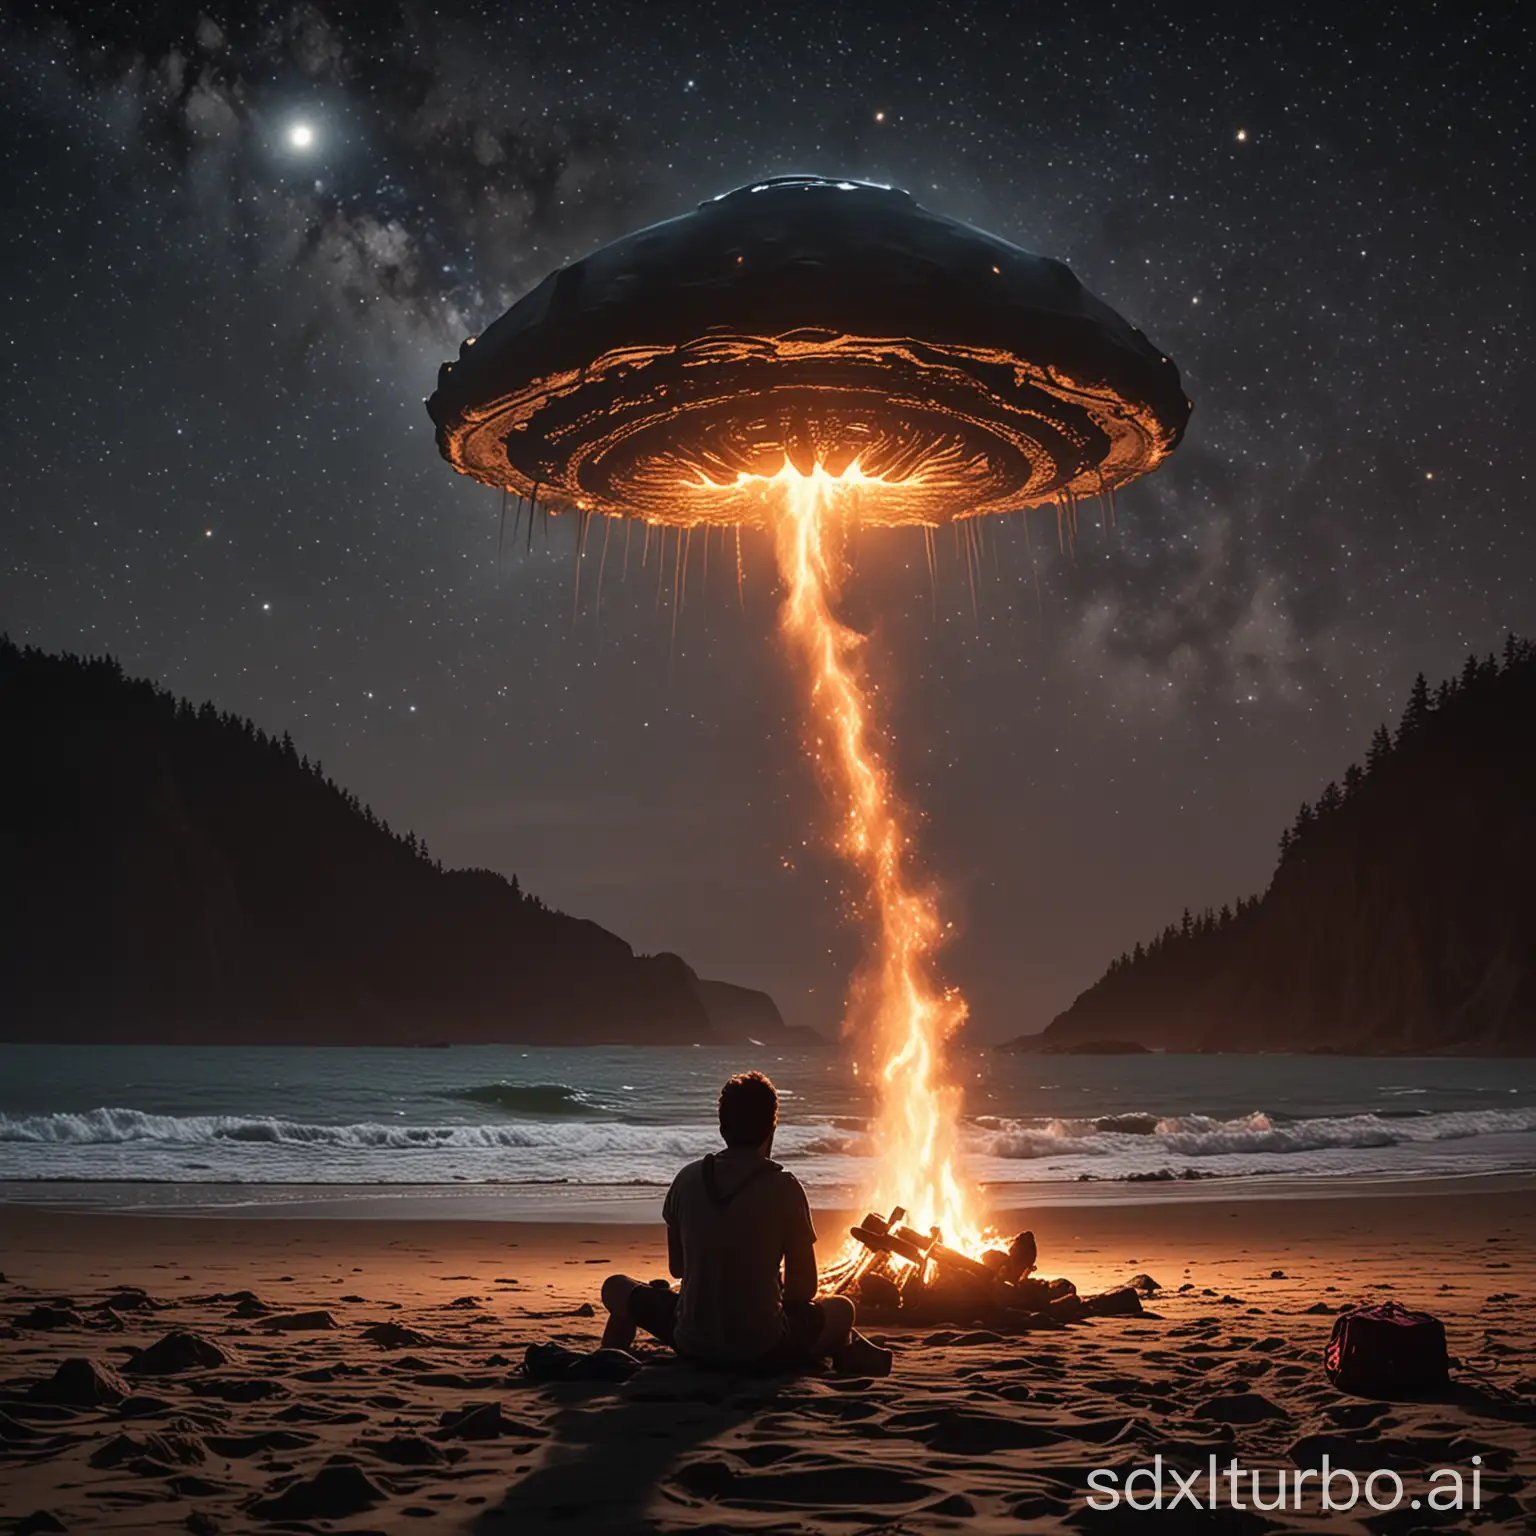 A man camping on the beach witnesses aliens invading the earth from the sky at midnight by the campfire